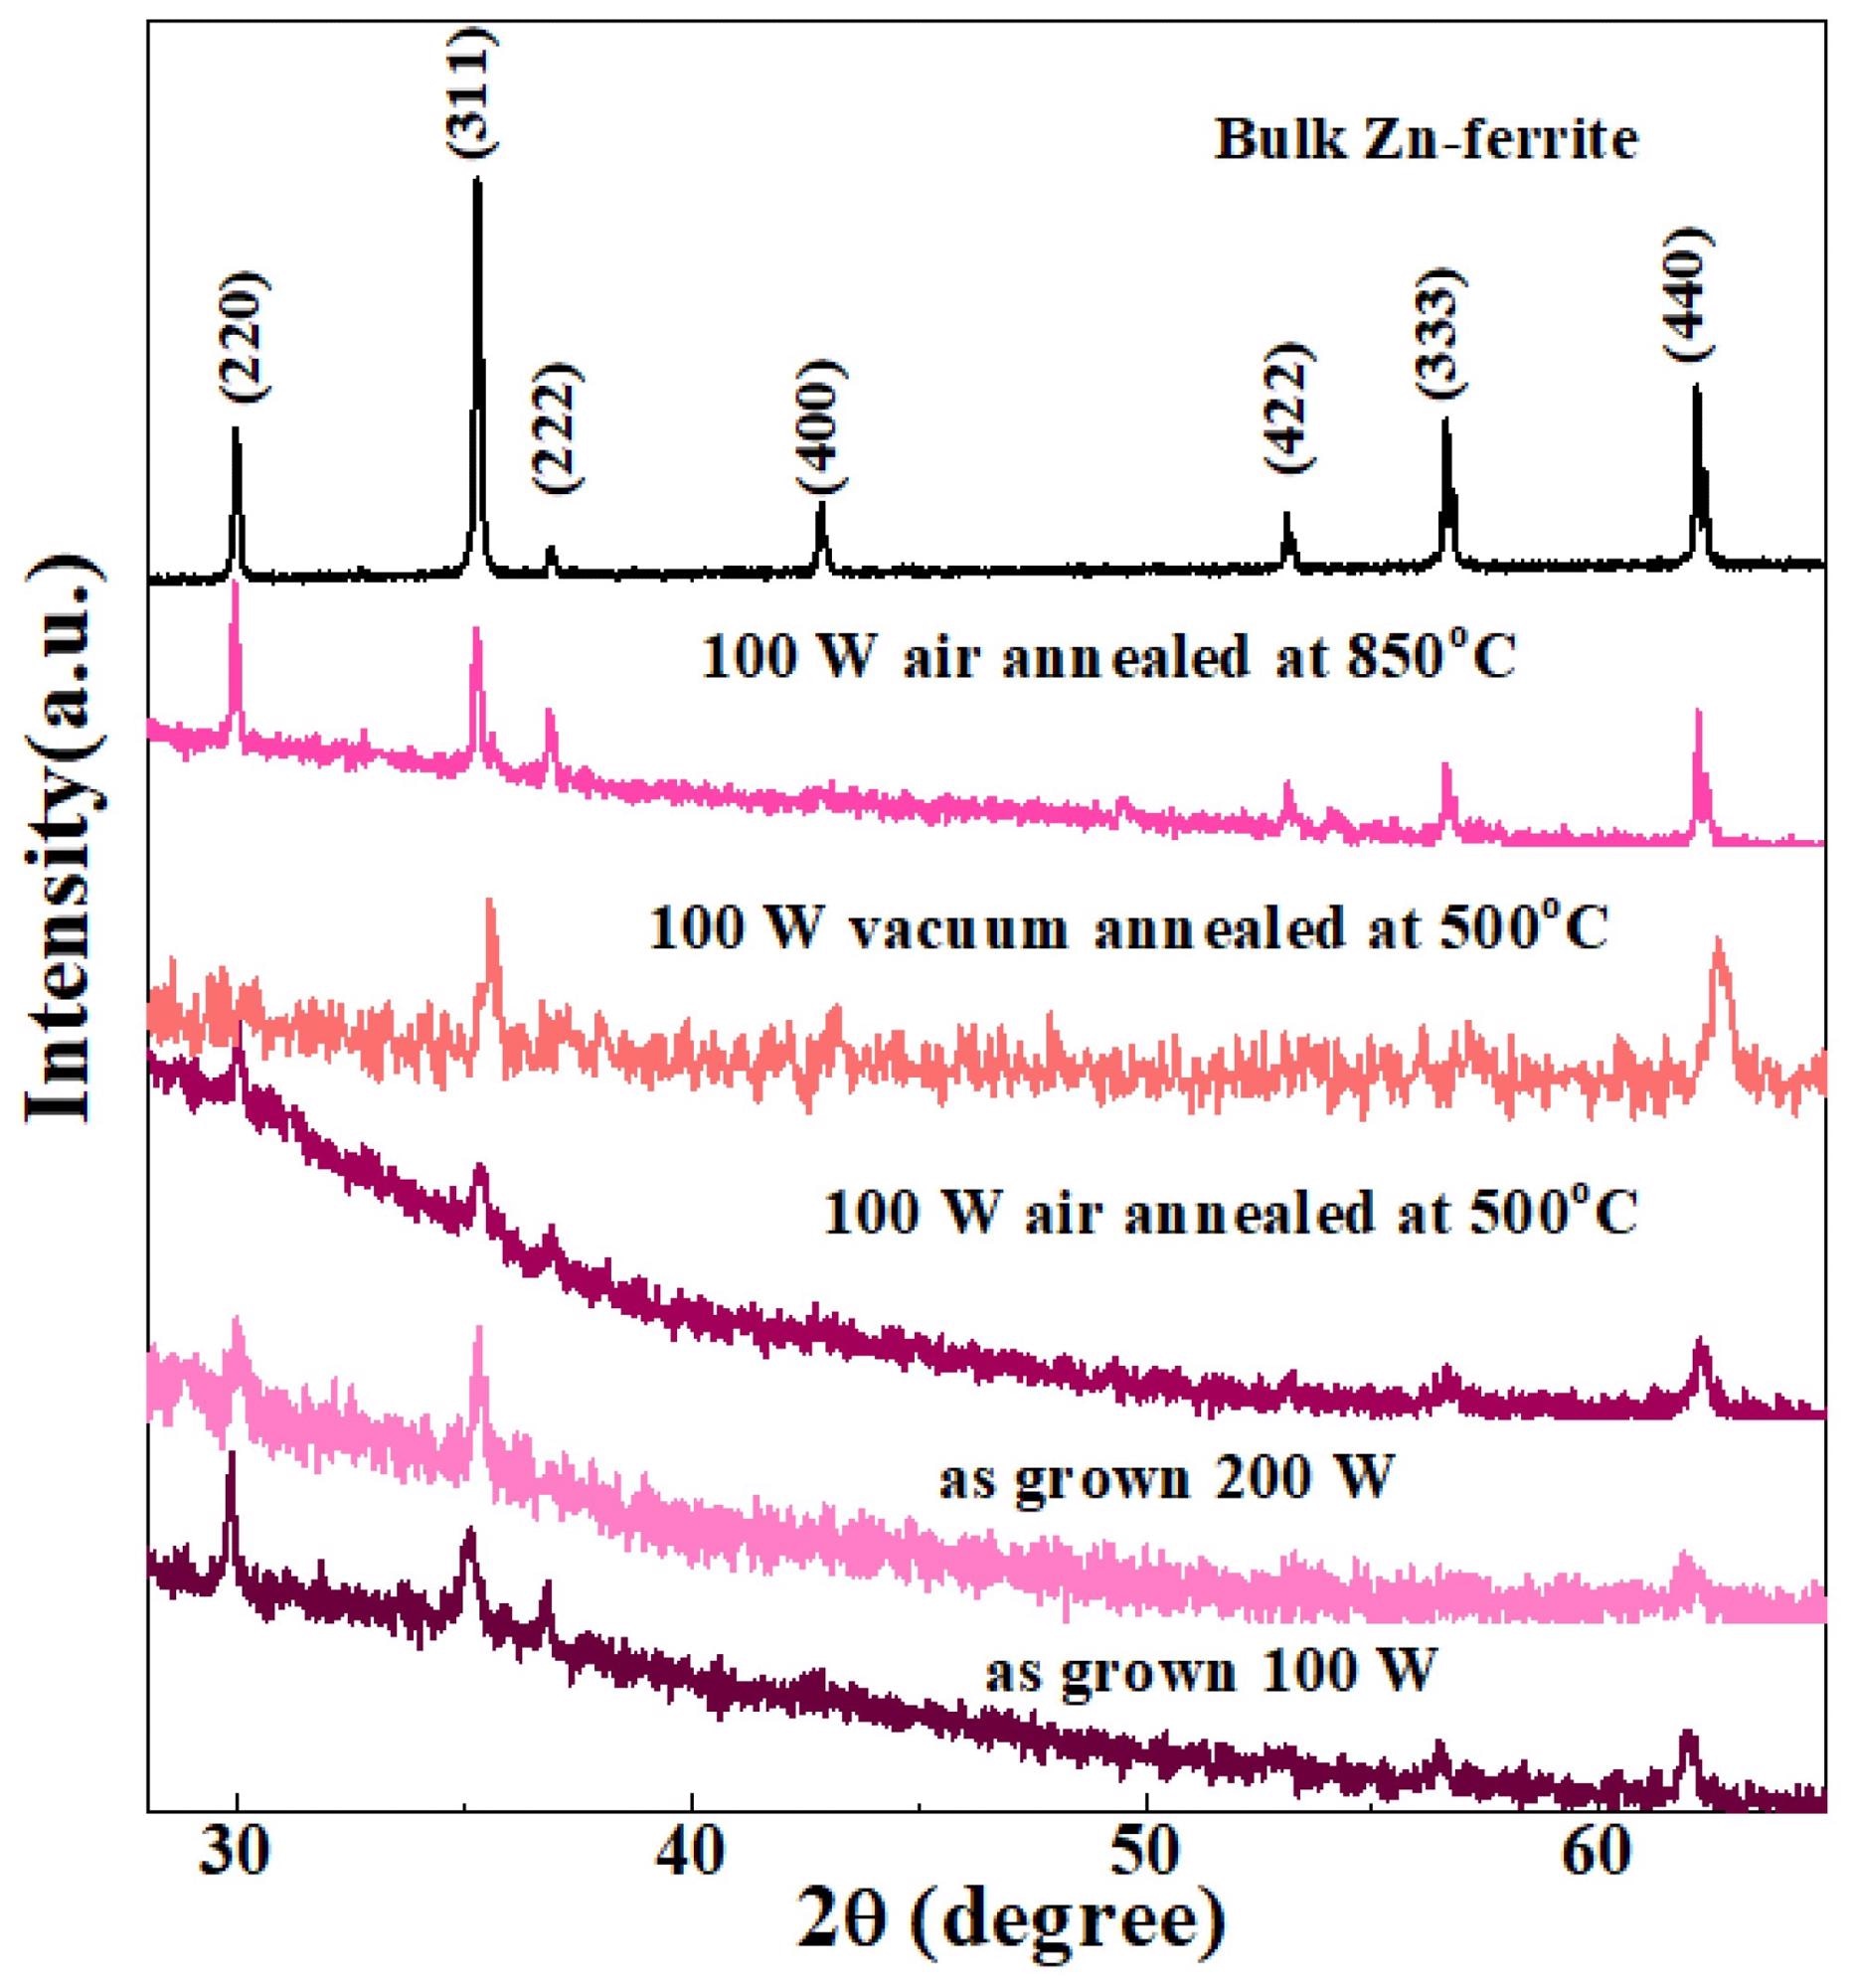 XRD patterns of as-grown, air-annealed, and vacuum-annealed Zn-ferrite thin films along with bulk Zn-ferrite data.